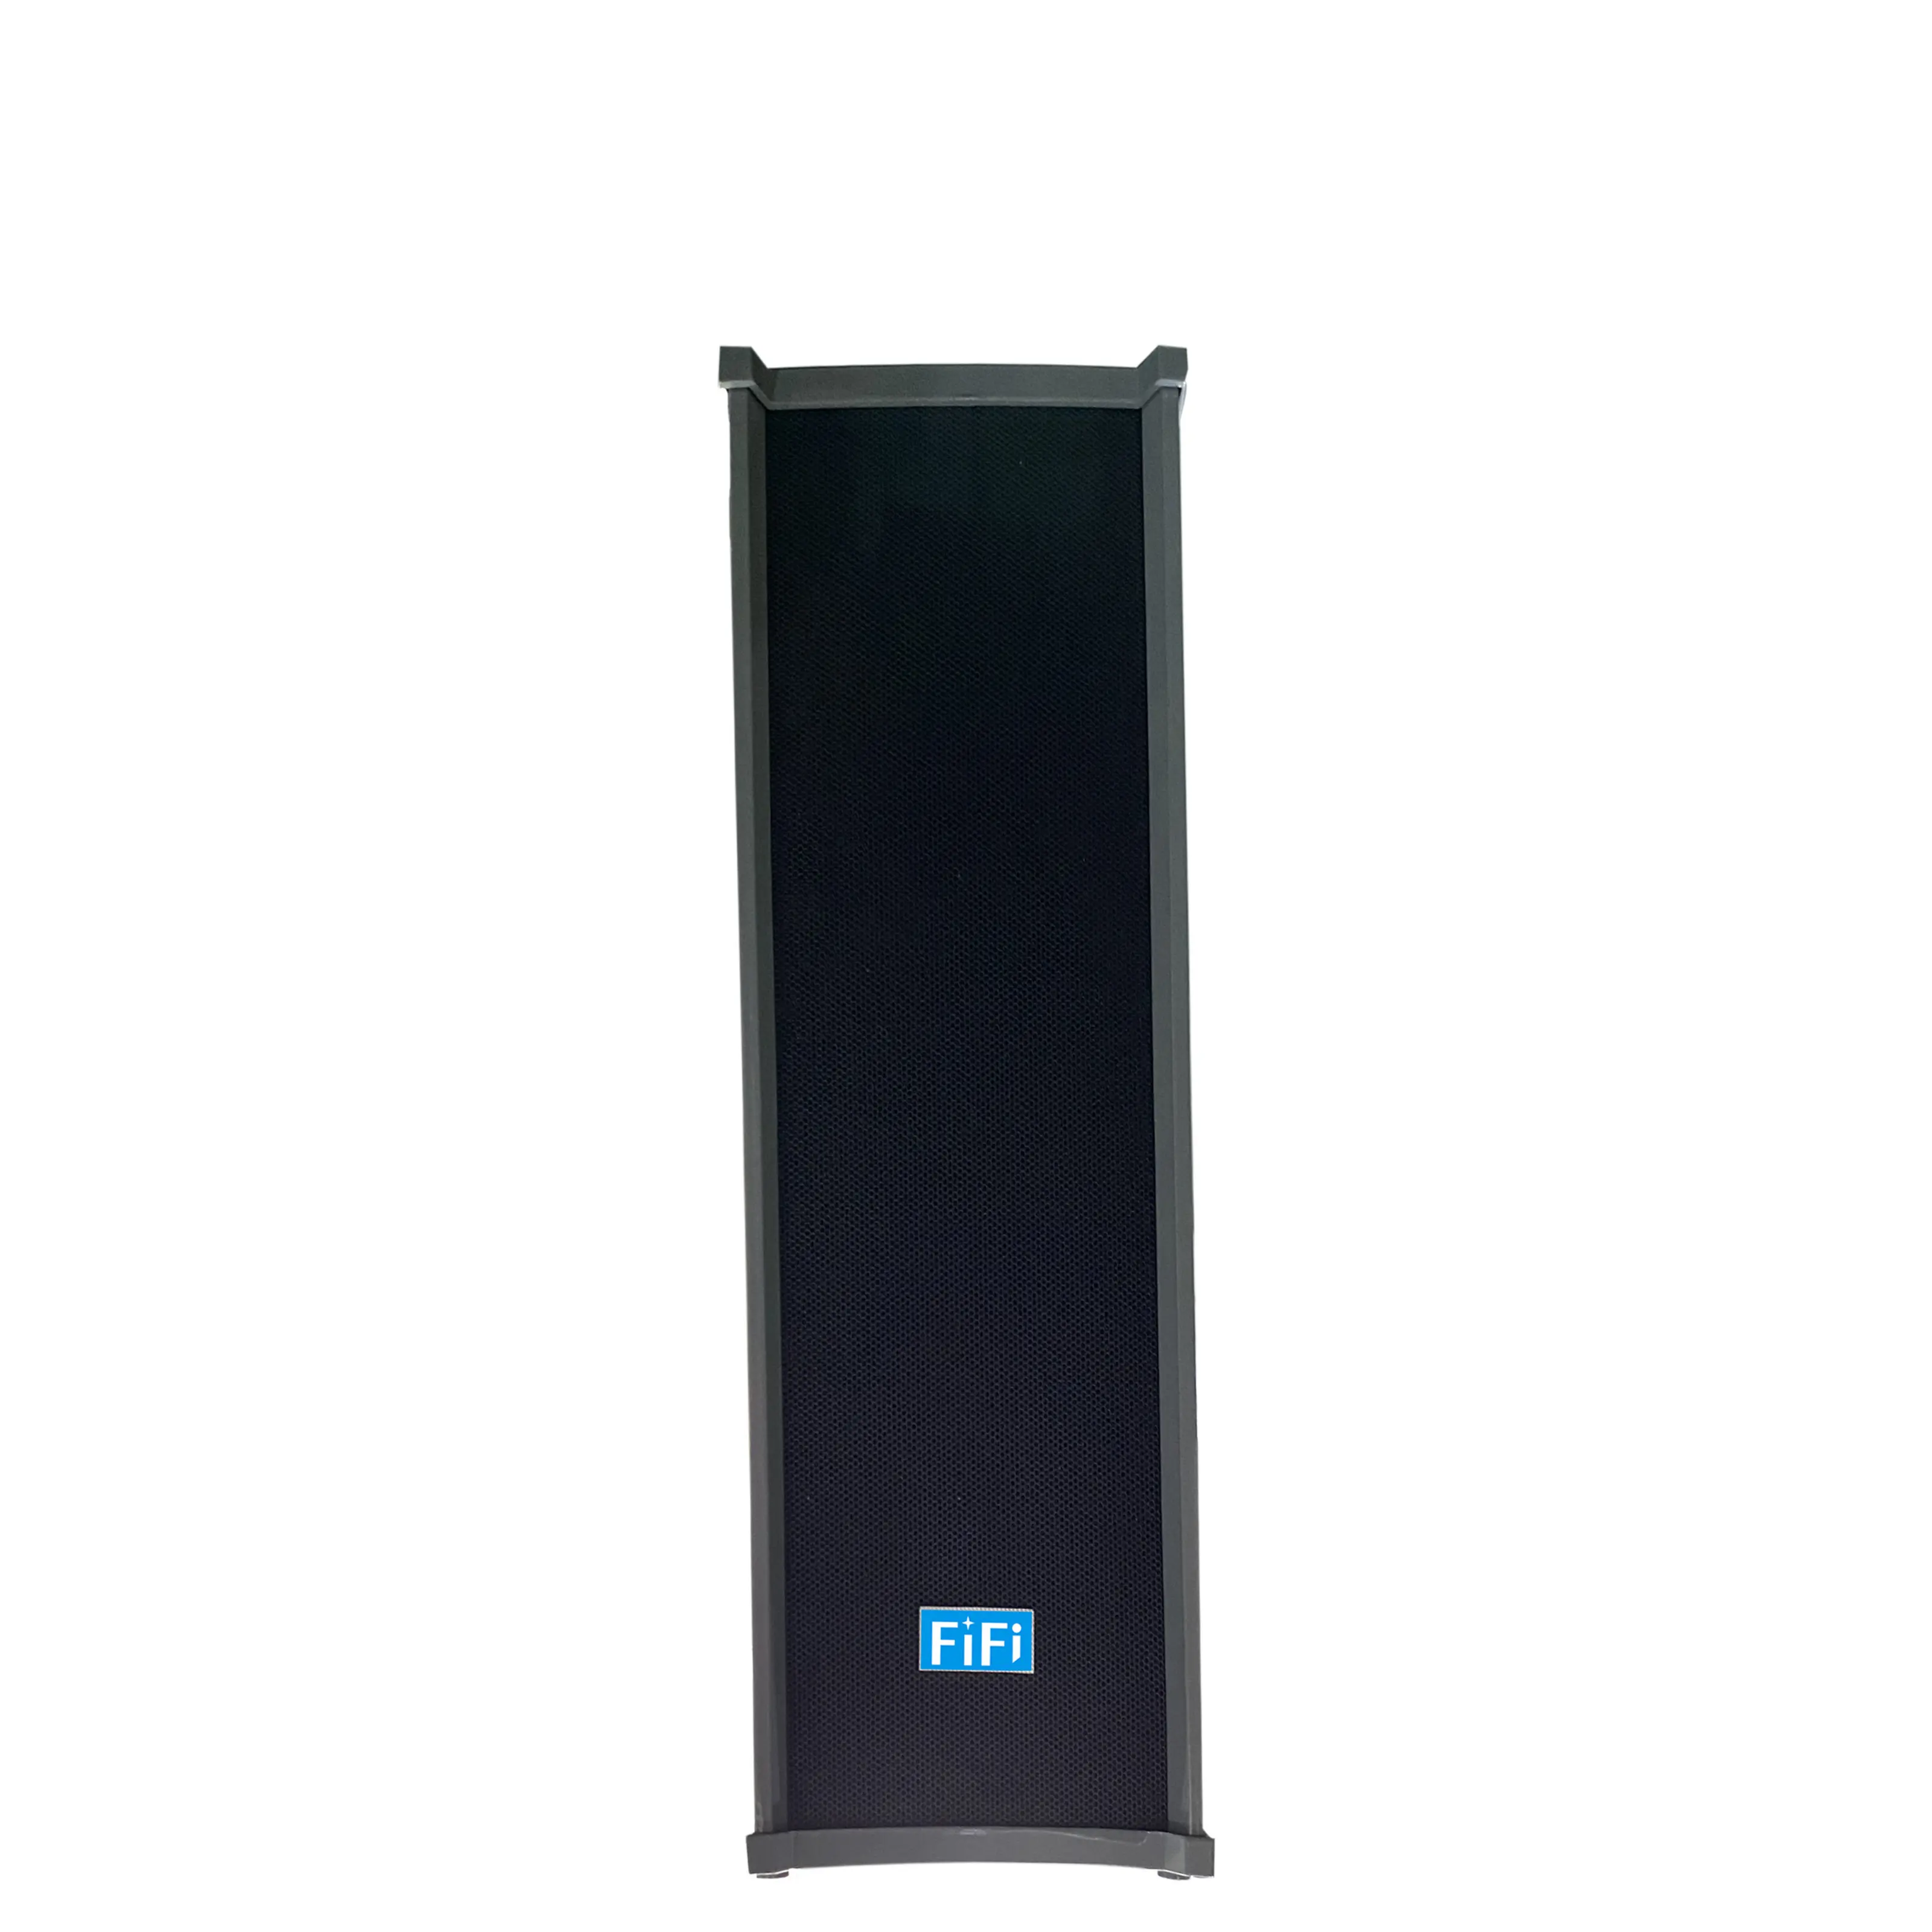 IP pa system Network waterproof sound column speaker outdoor for public address system